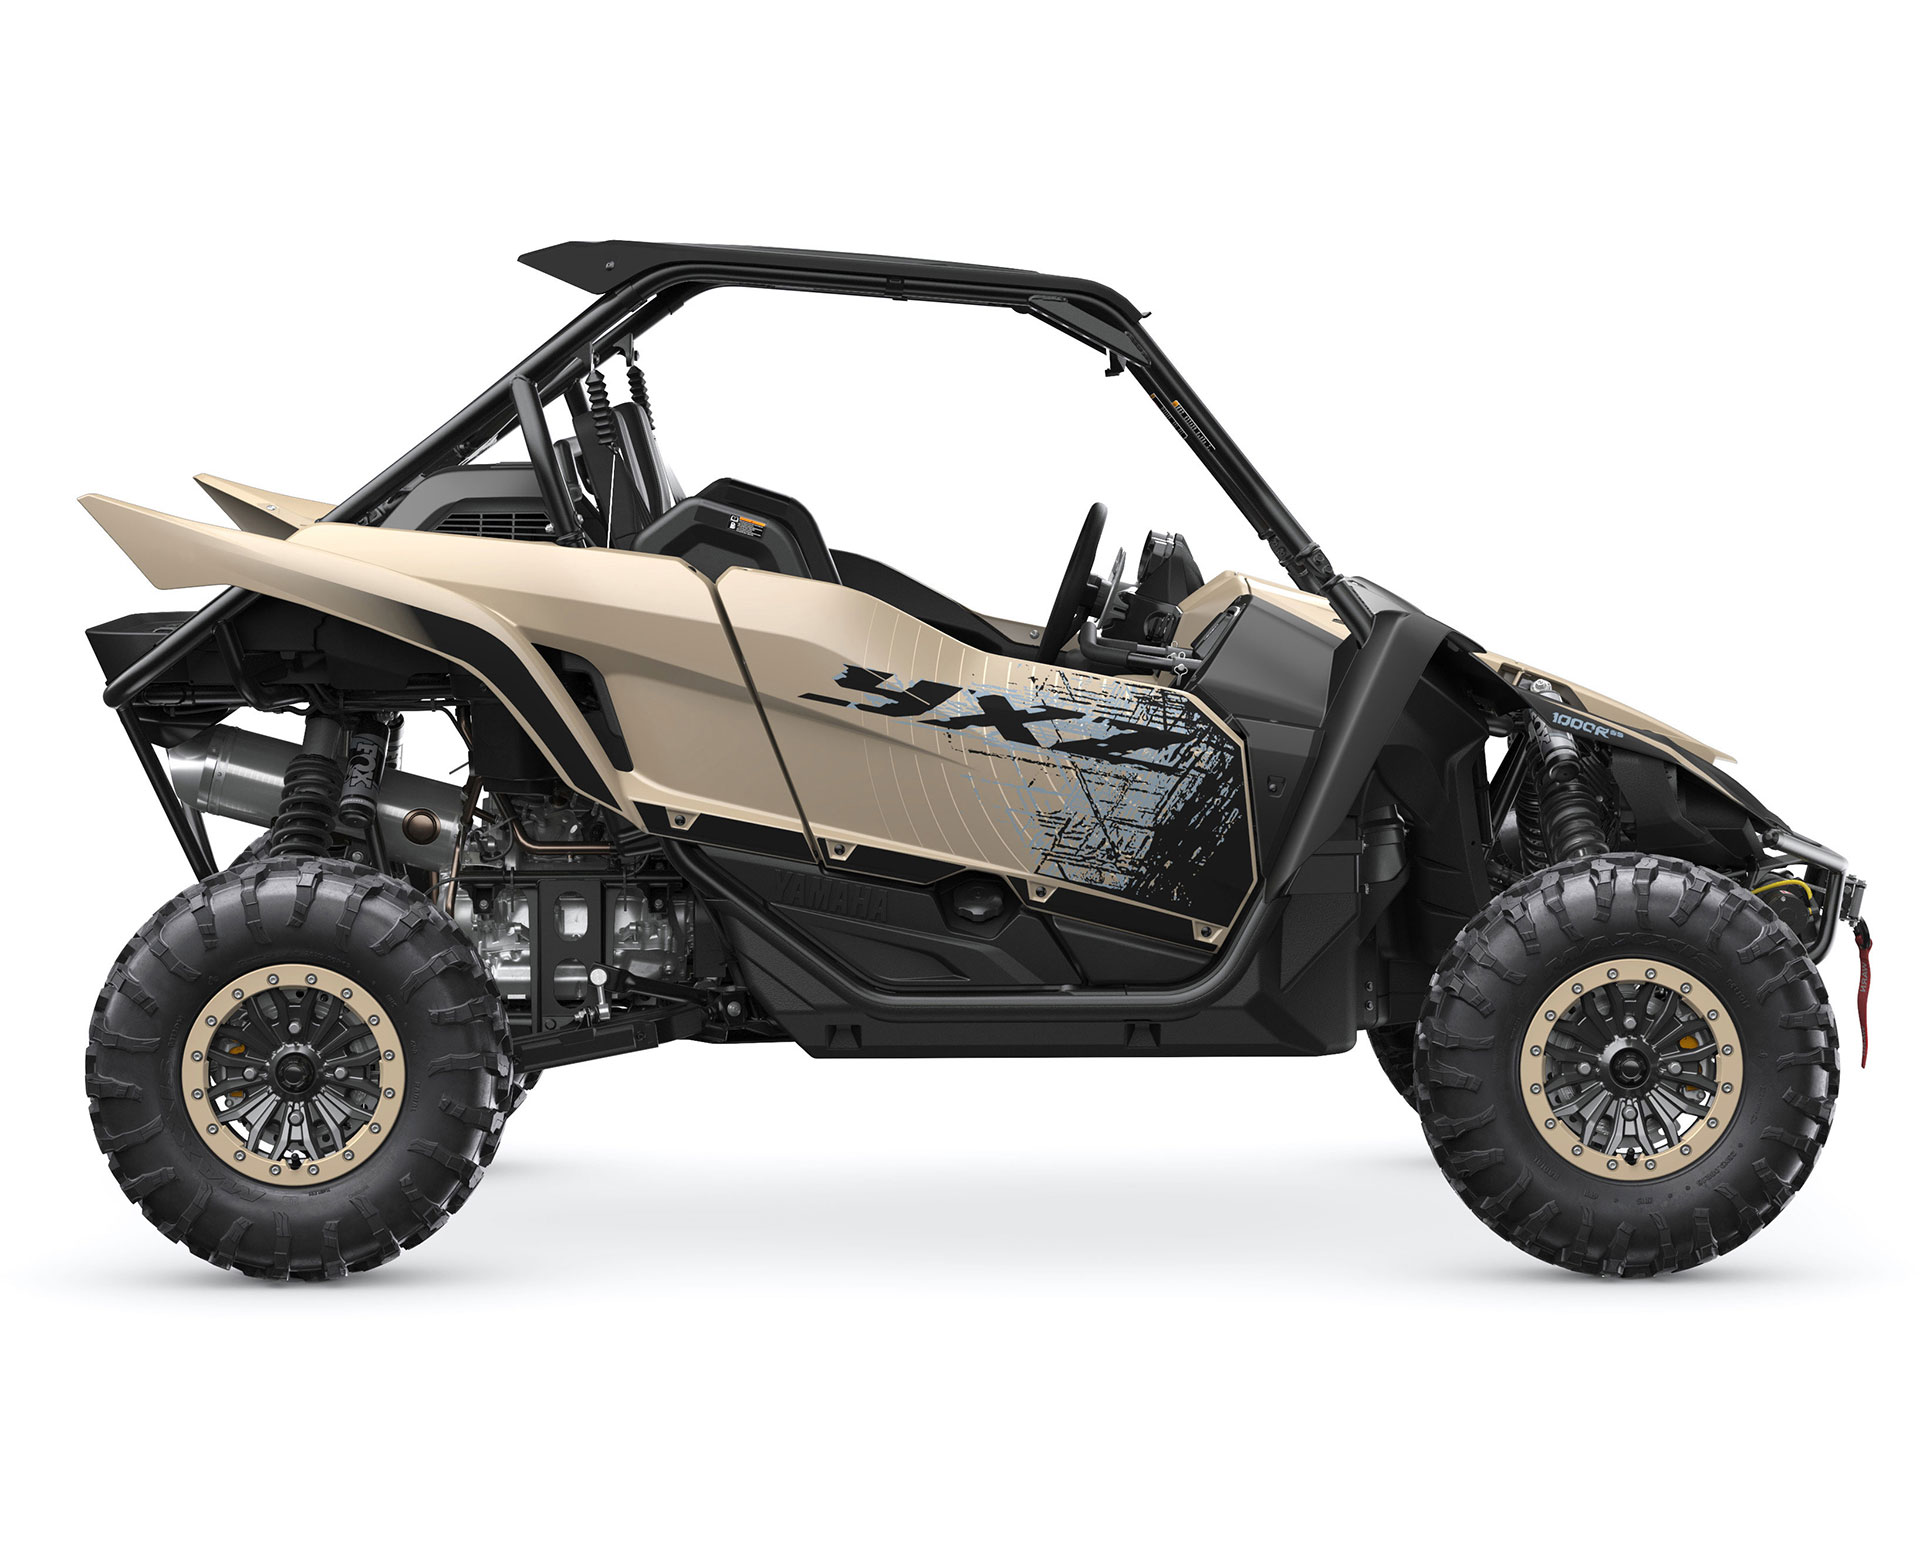 Thumbnail of your customized 2023 YXZ1000R SS SE